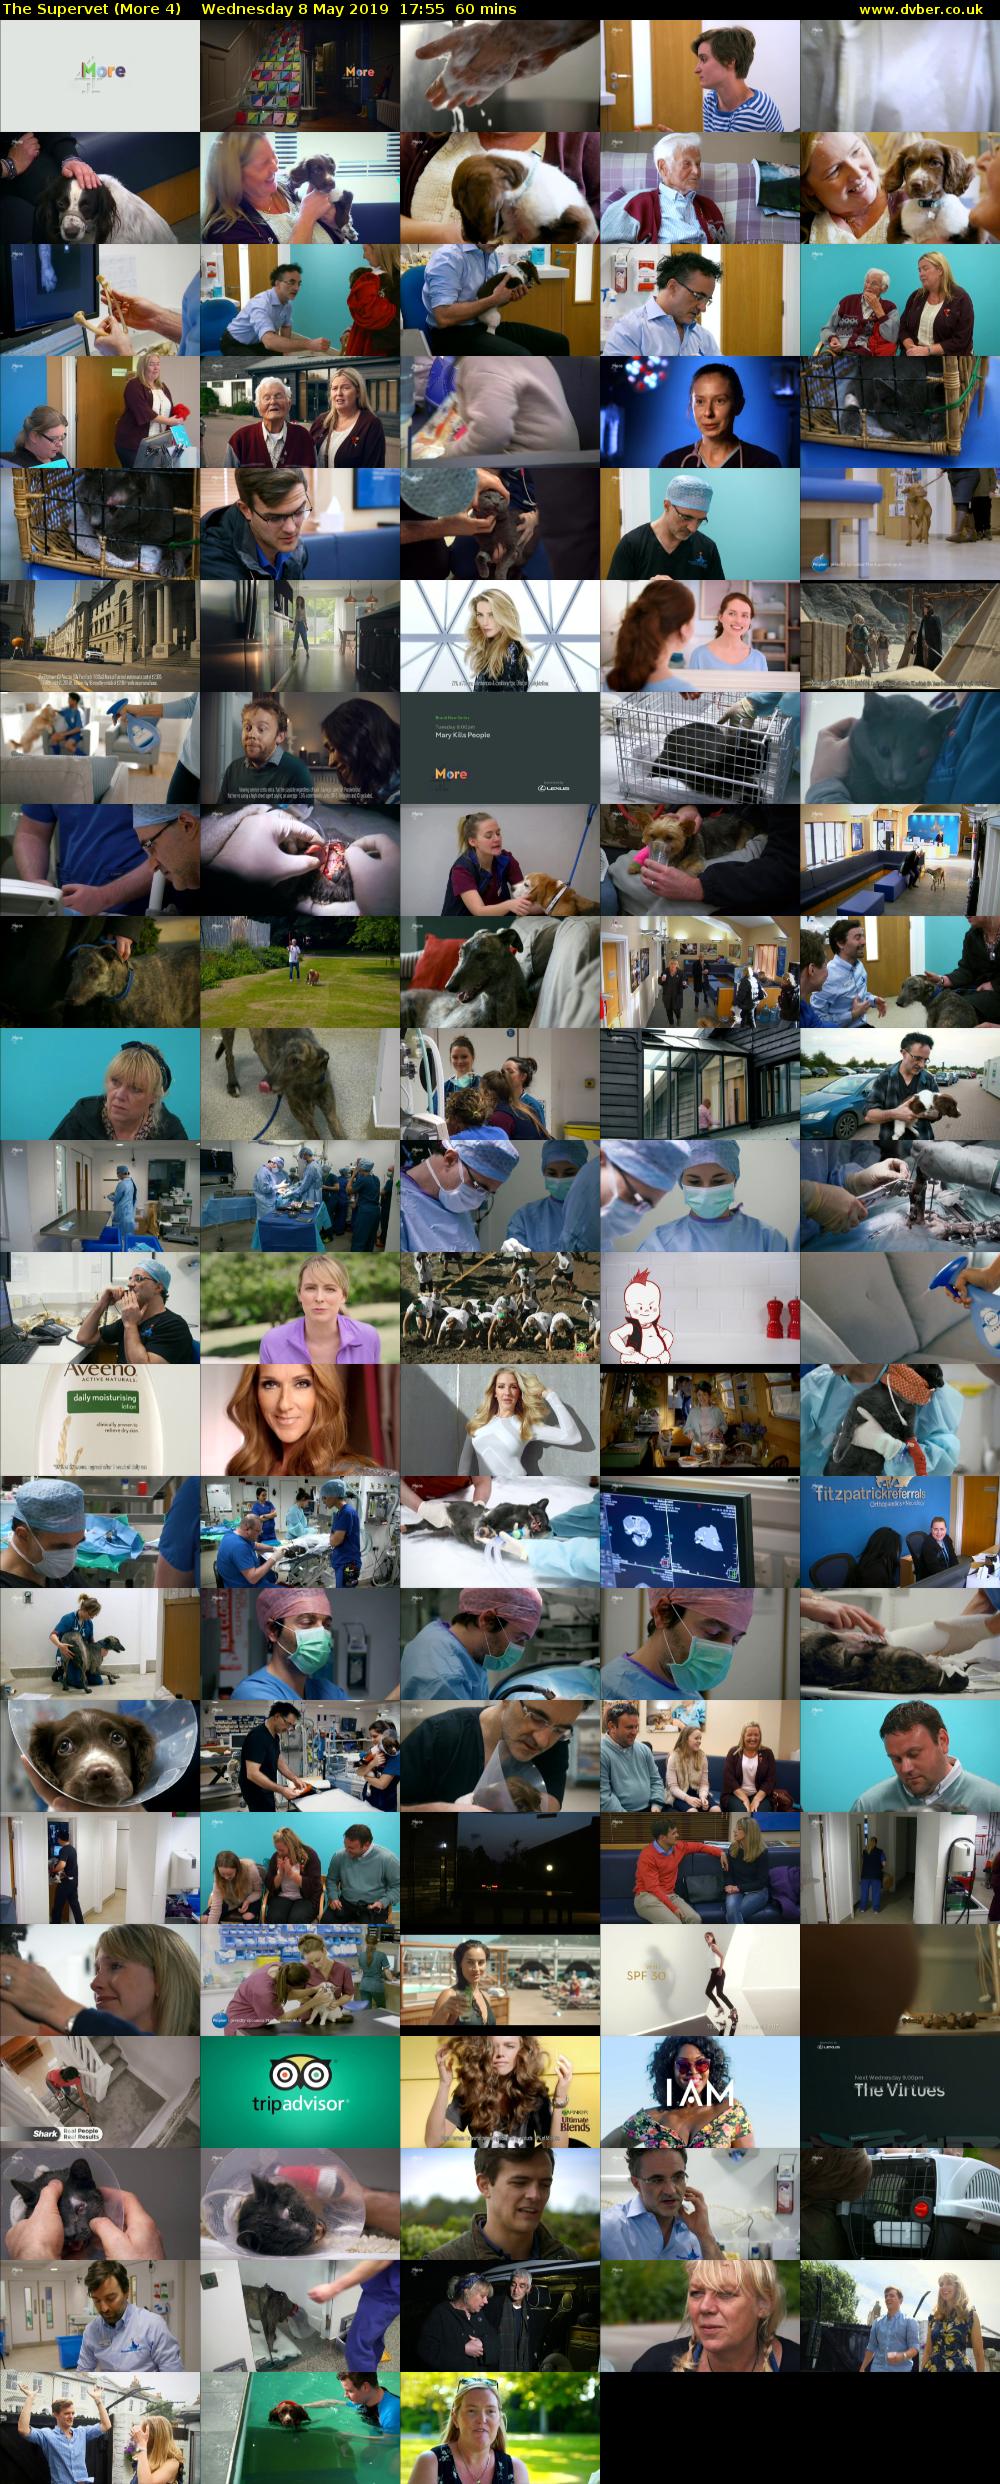 The Supervet (More 4) Wednesday 8 May 2019 17:55 - 18:55